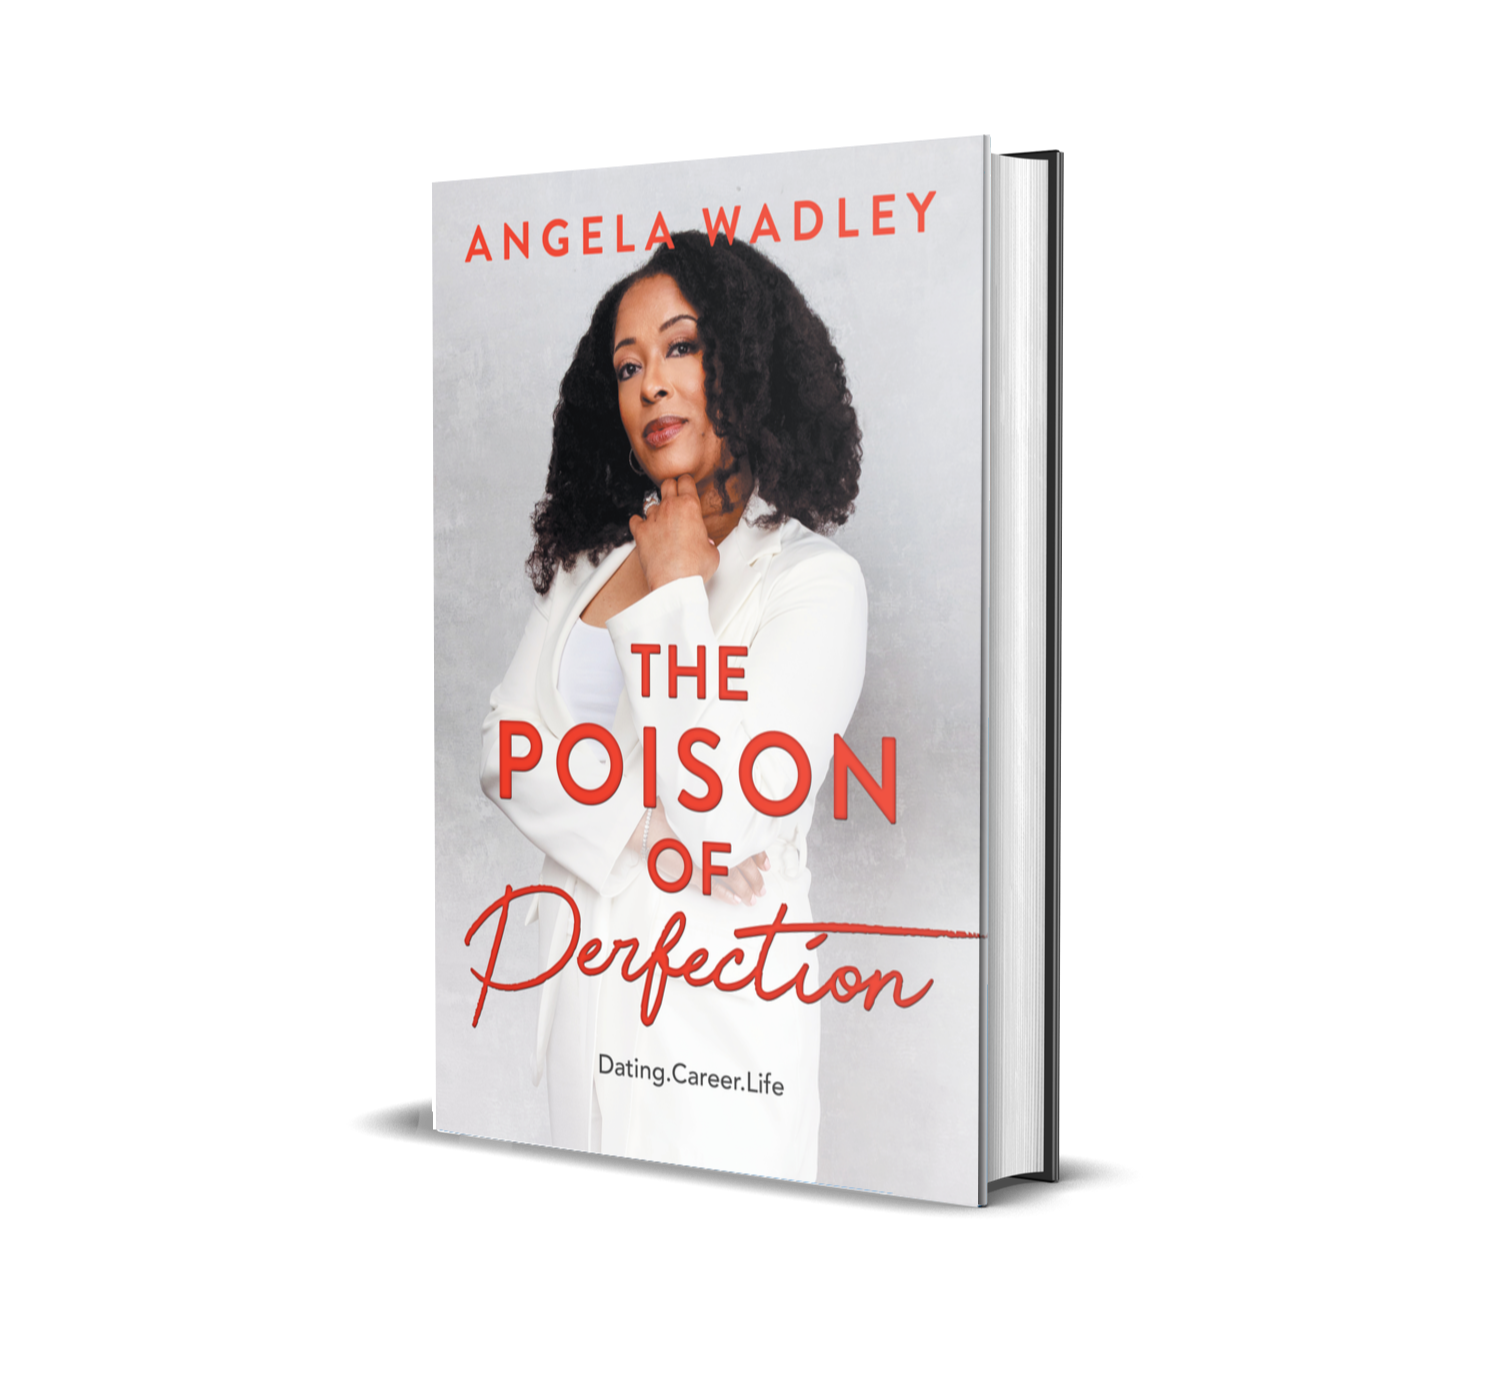 Author and NLP Coach Angela Wadley Wins Multiple Awards for the Book "The Poison of Perfection"